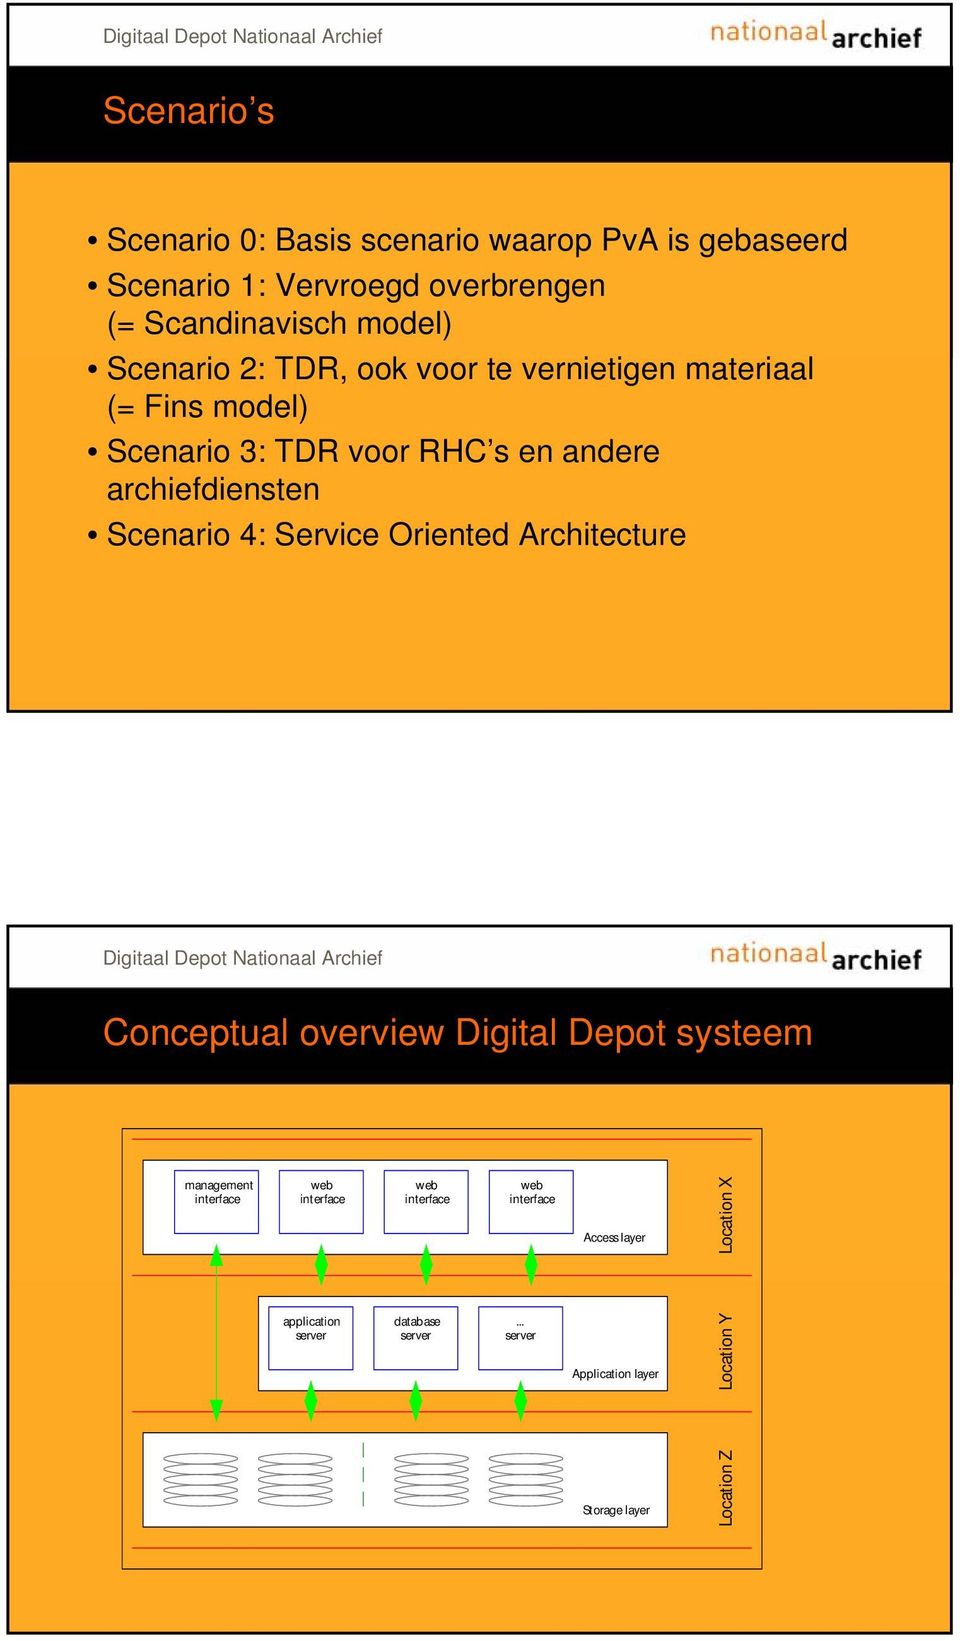 Scenario 4: Service Oriented Architecture Conceptual overview Digital Depot systeem management interface web interface web